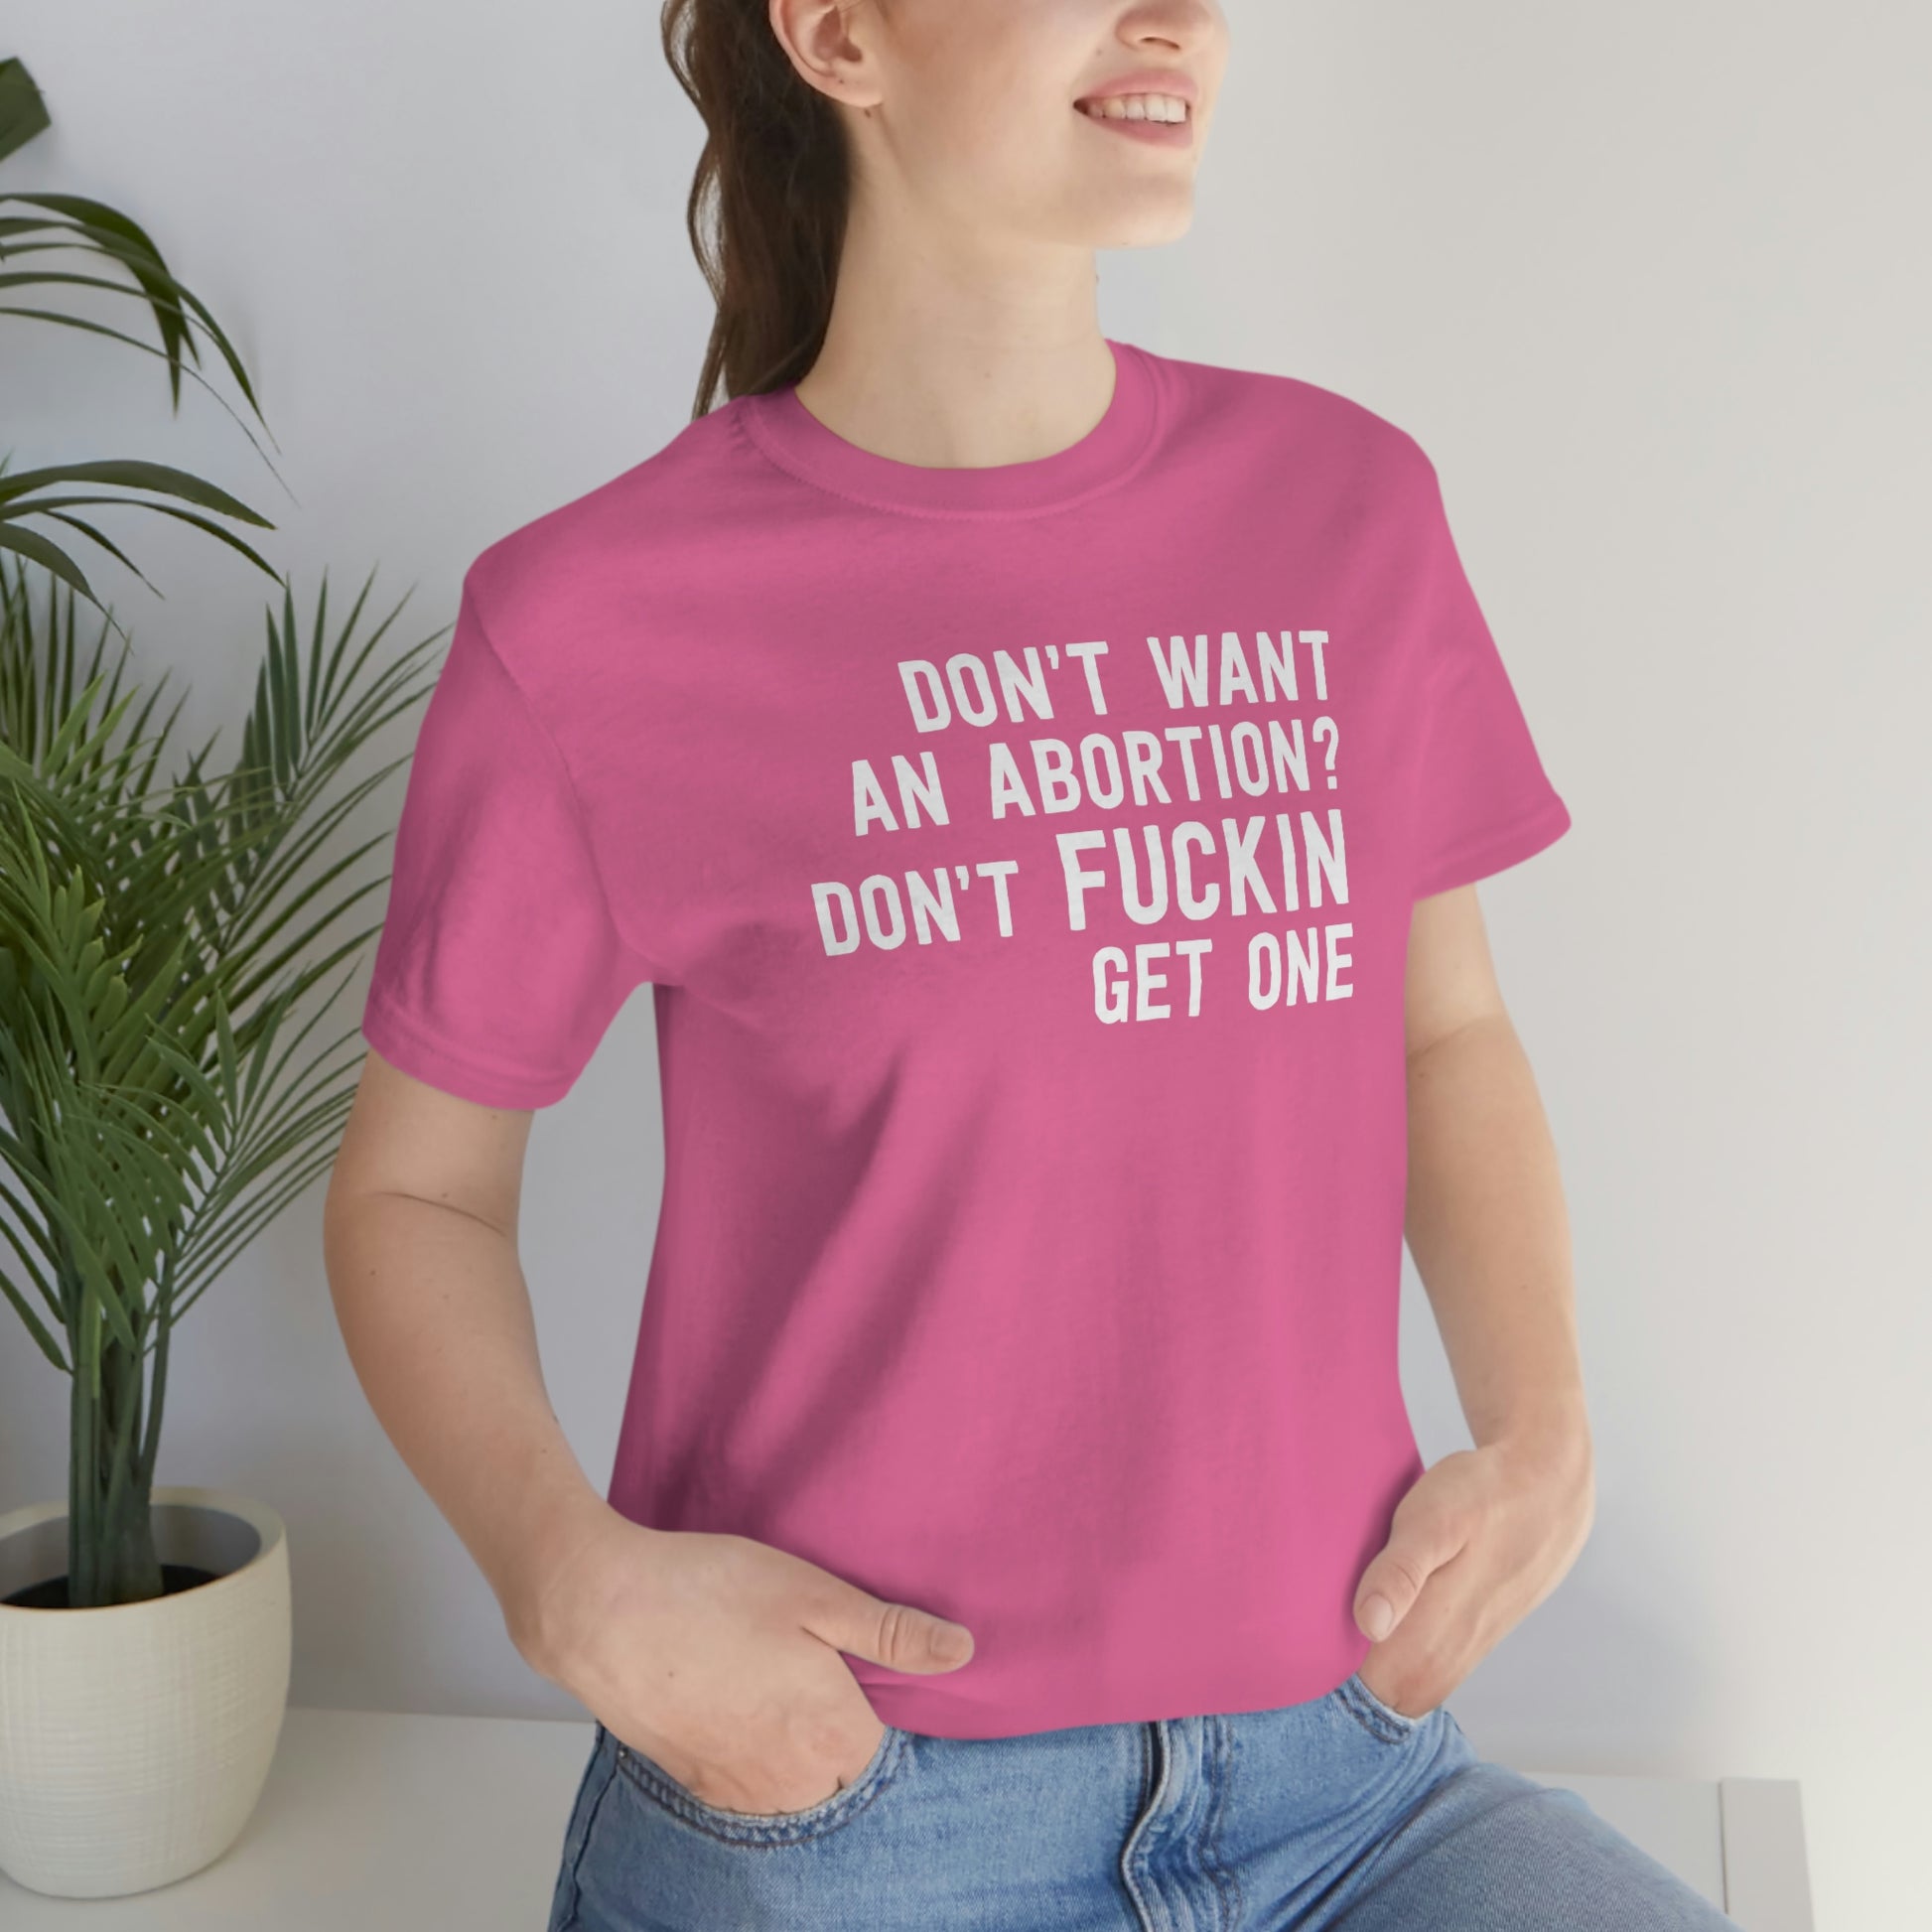 Don't want an abortion? Don't fucking get one T-Shirt in Pink - Female Model